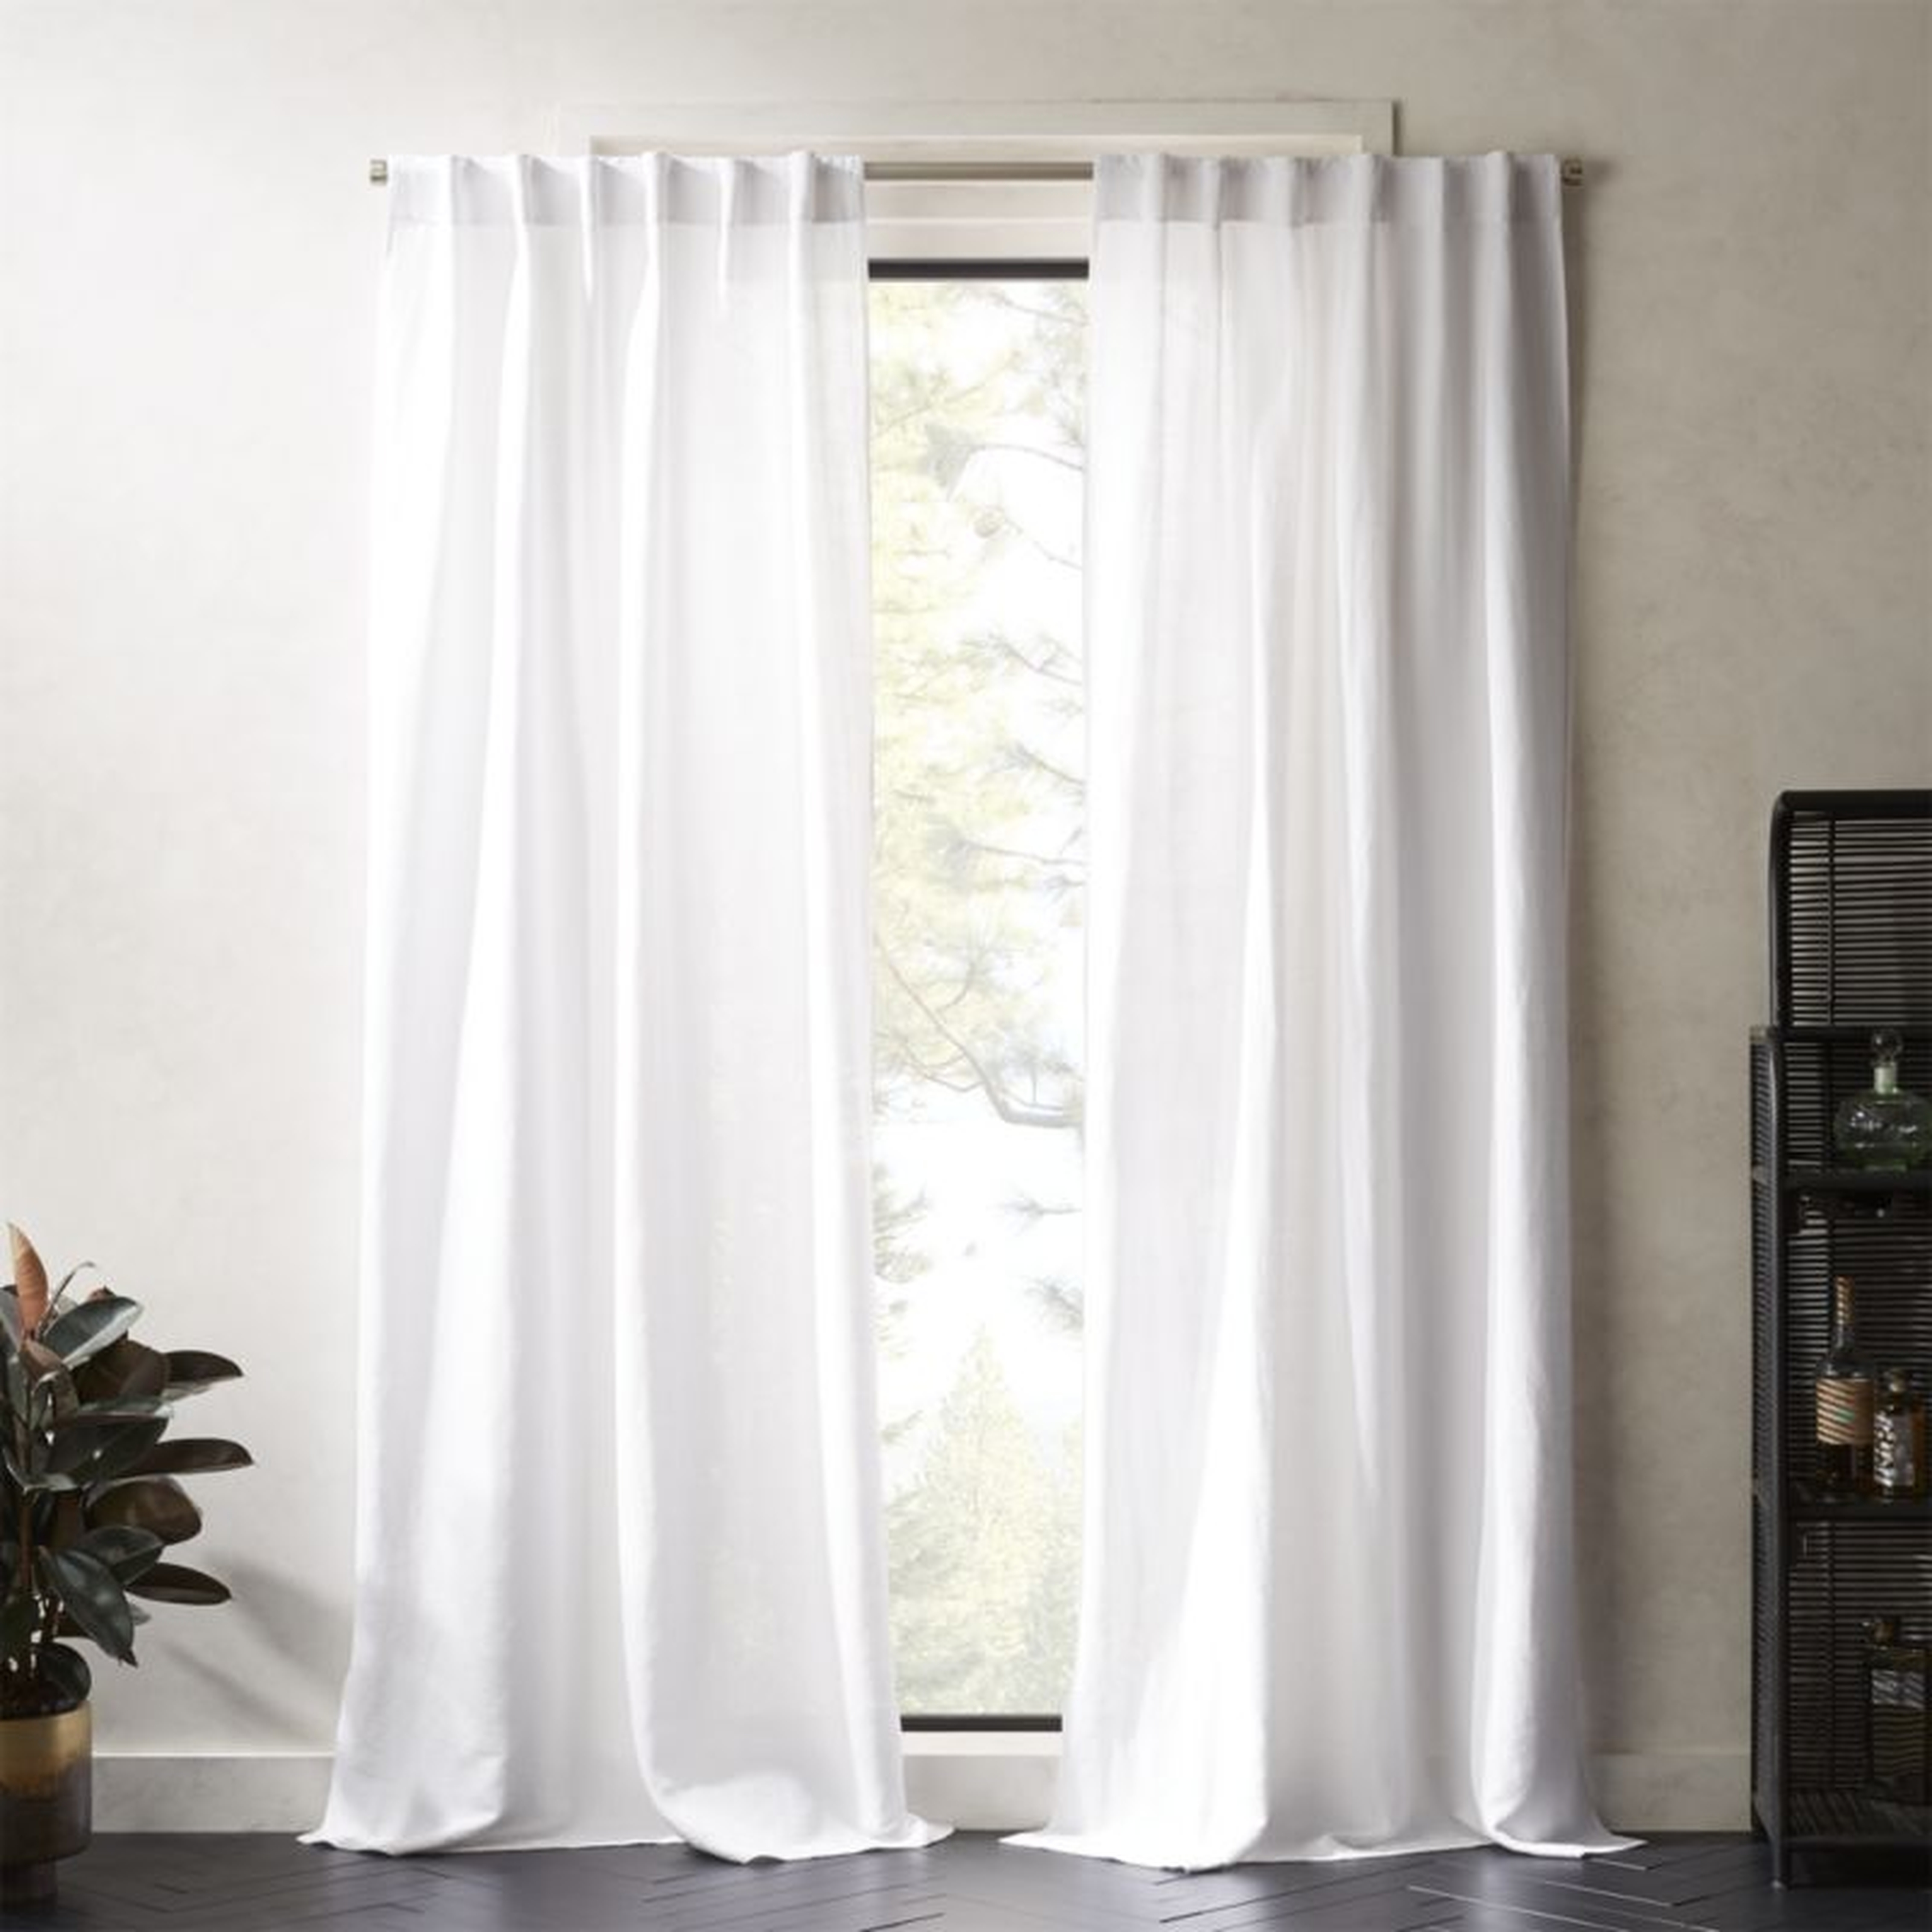 Weekendr White Chambray Curtain Panel 48"x84" - CB2